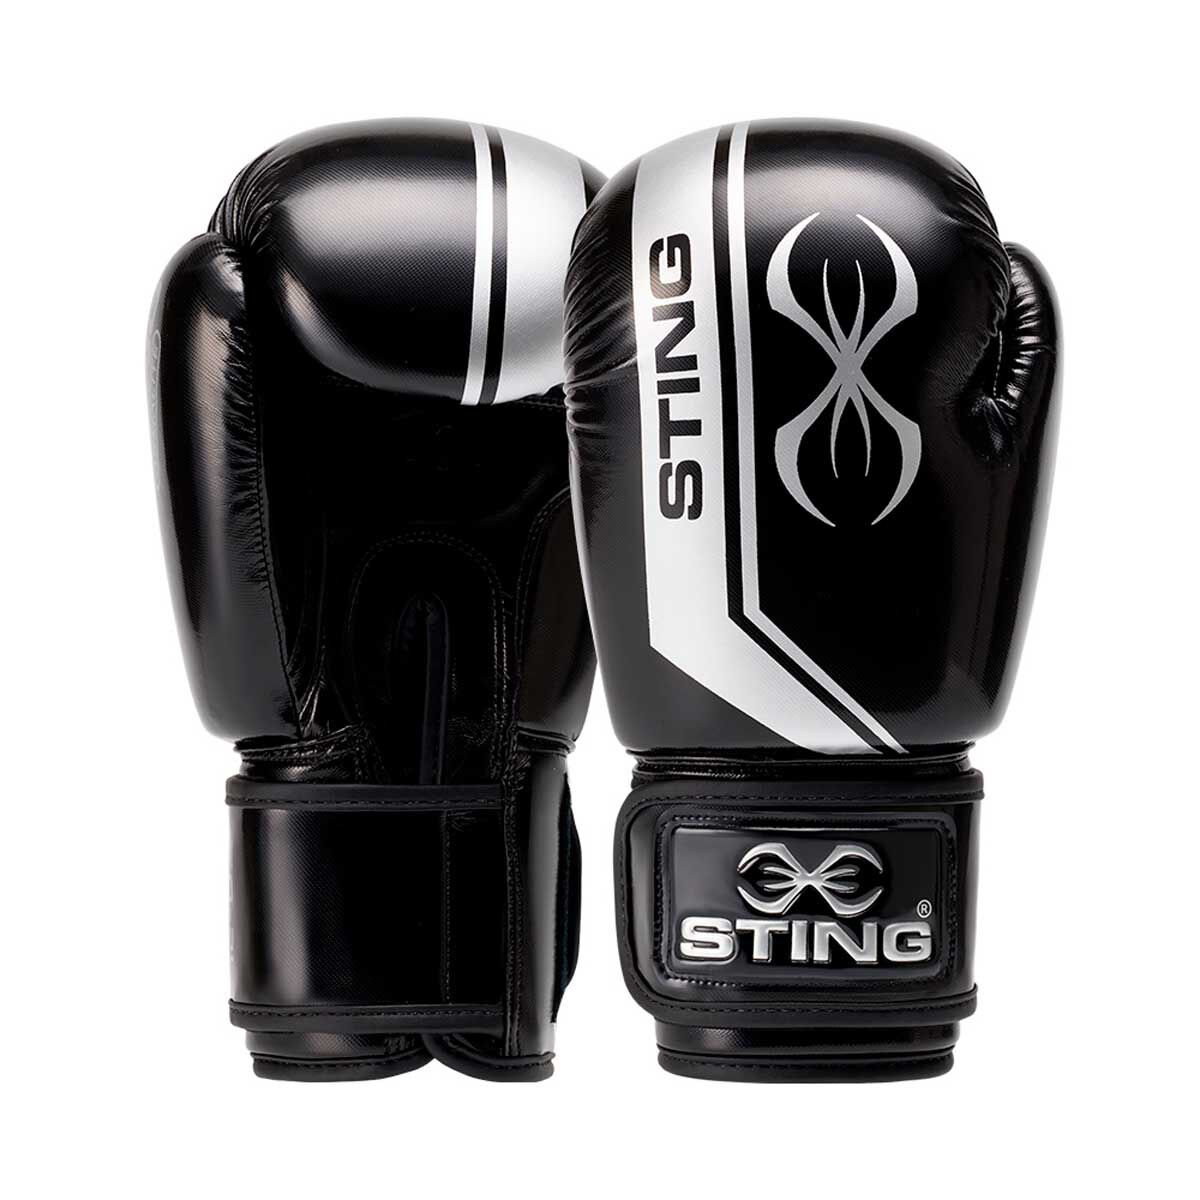 Armalite Boxing Gloves for Competition & Training STING Olympics Sponsor 